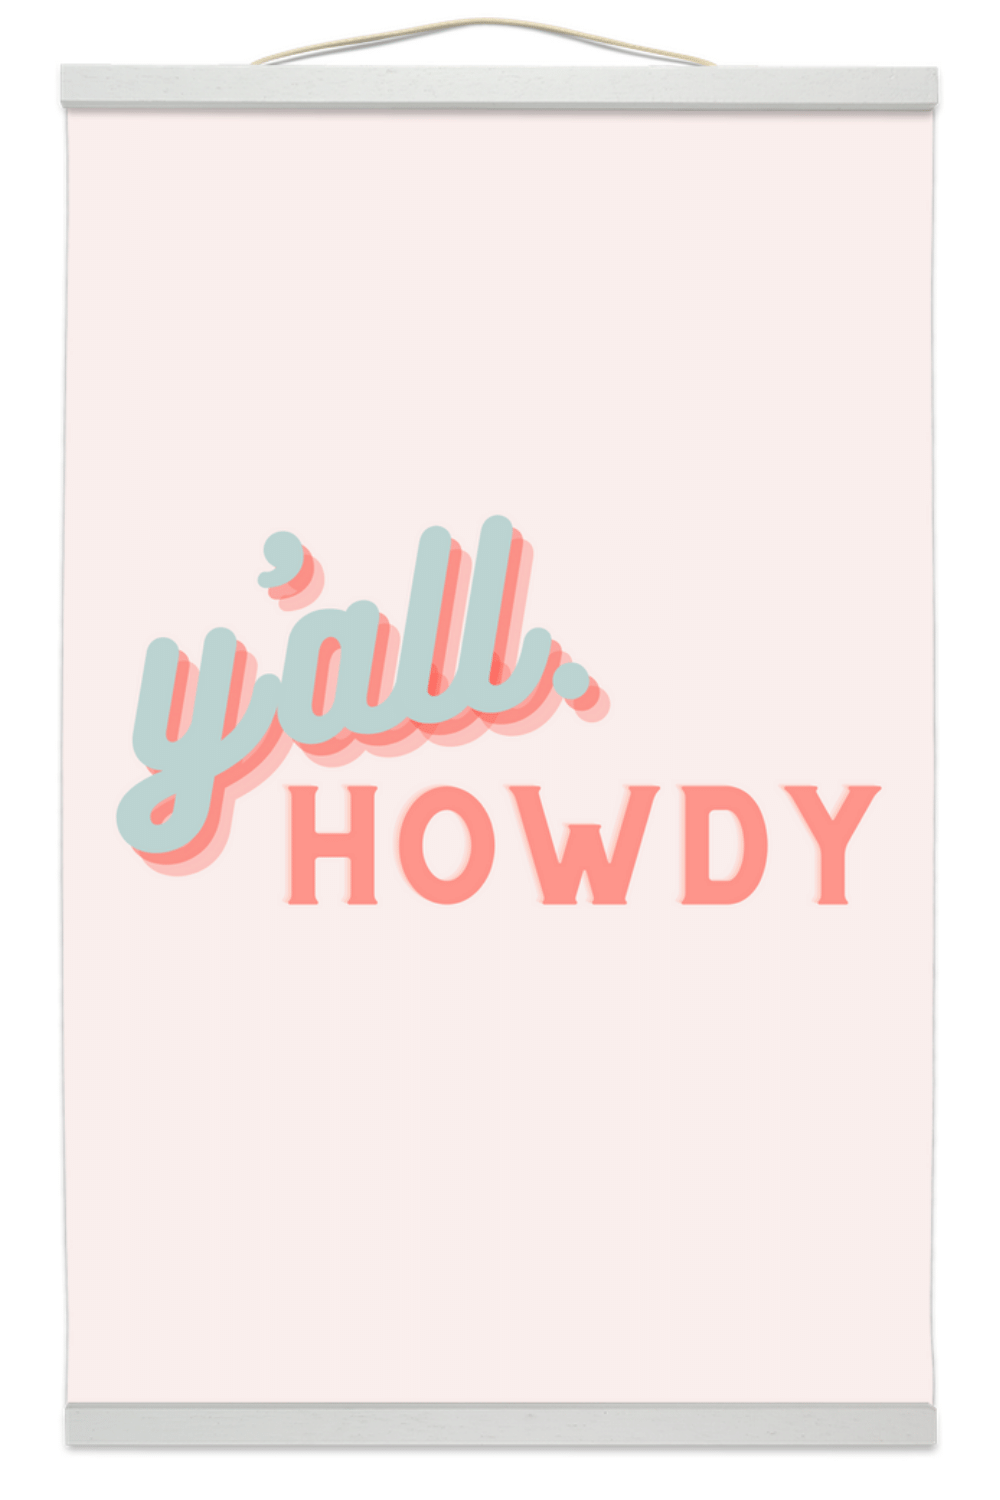 Hanging Canvas - Dorm Room Hanging Canvas - Y'all Howdy